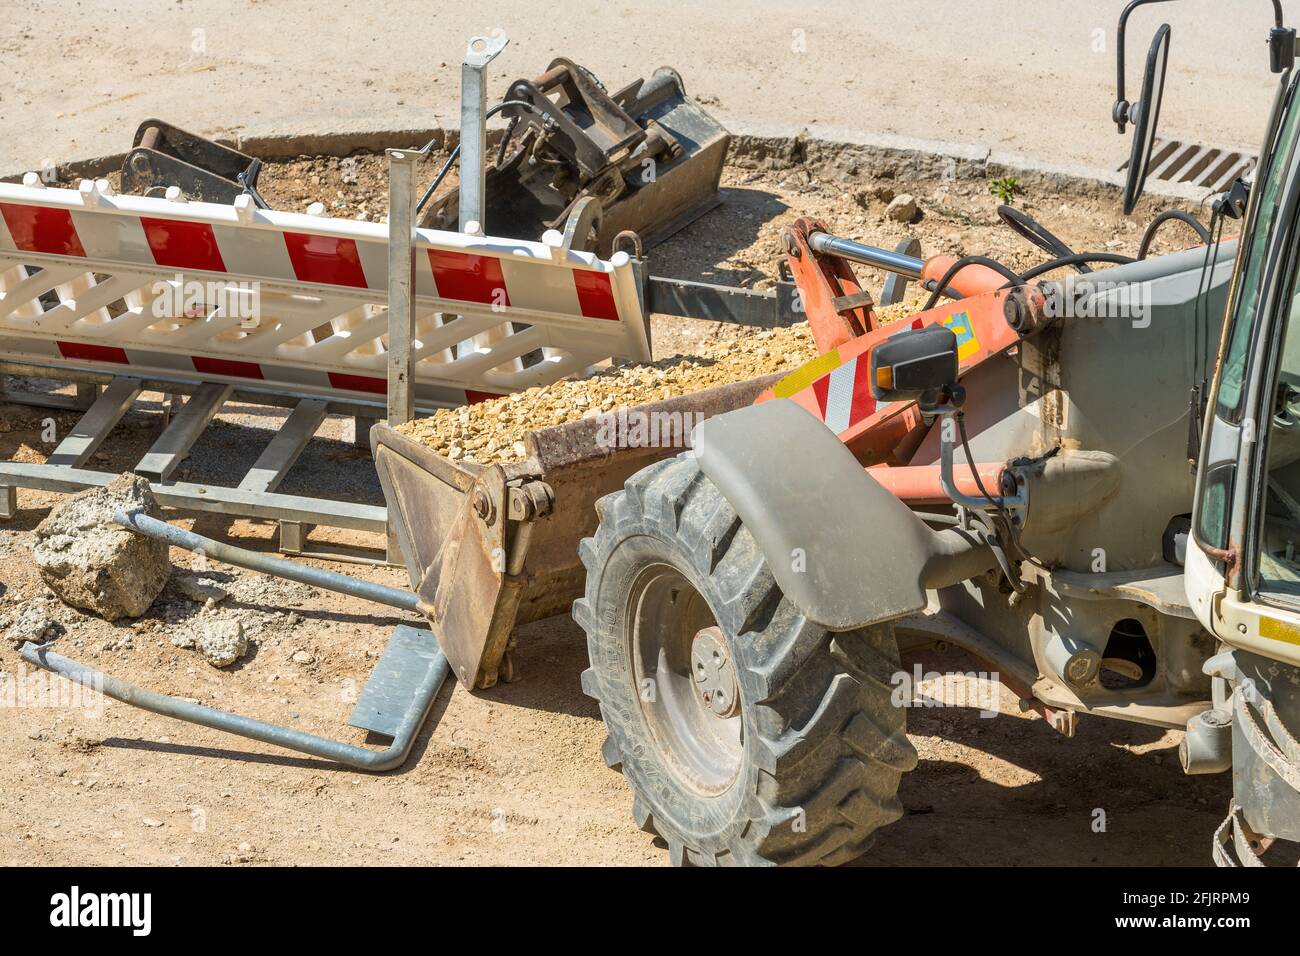 Road construction site with excavator and sand, road construction work in progress Stock Photo